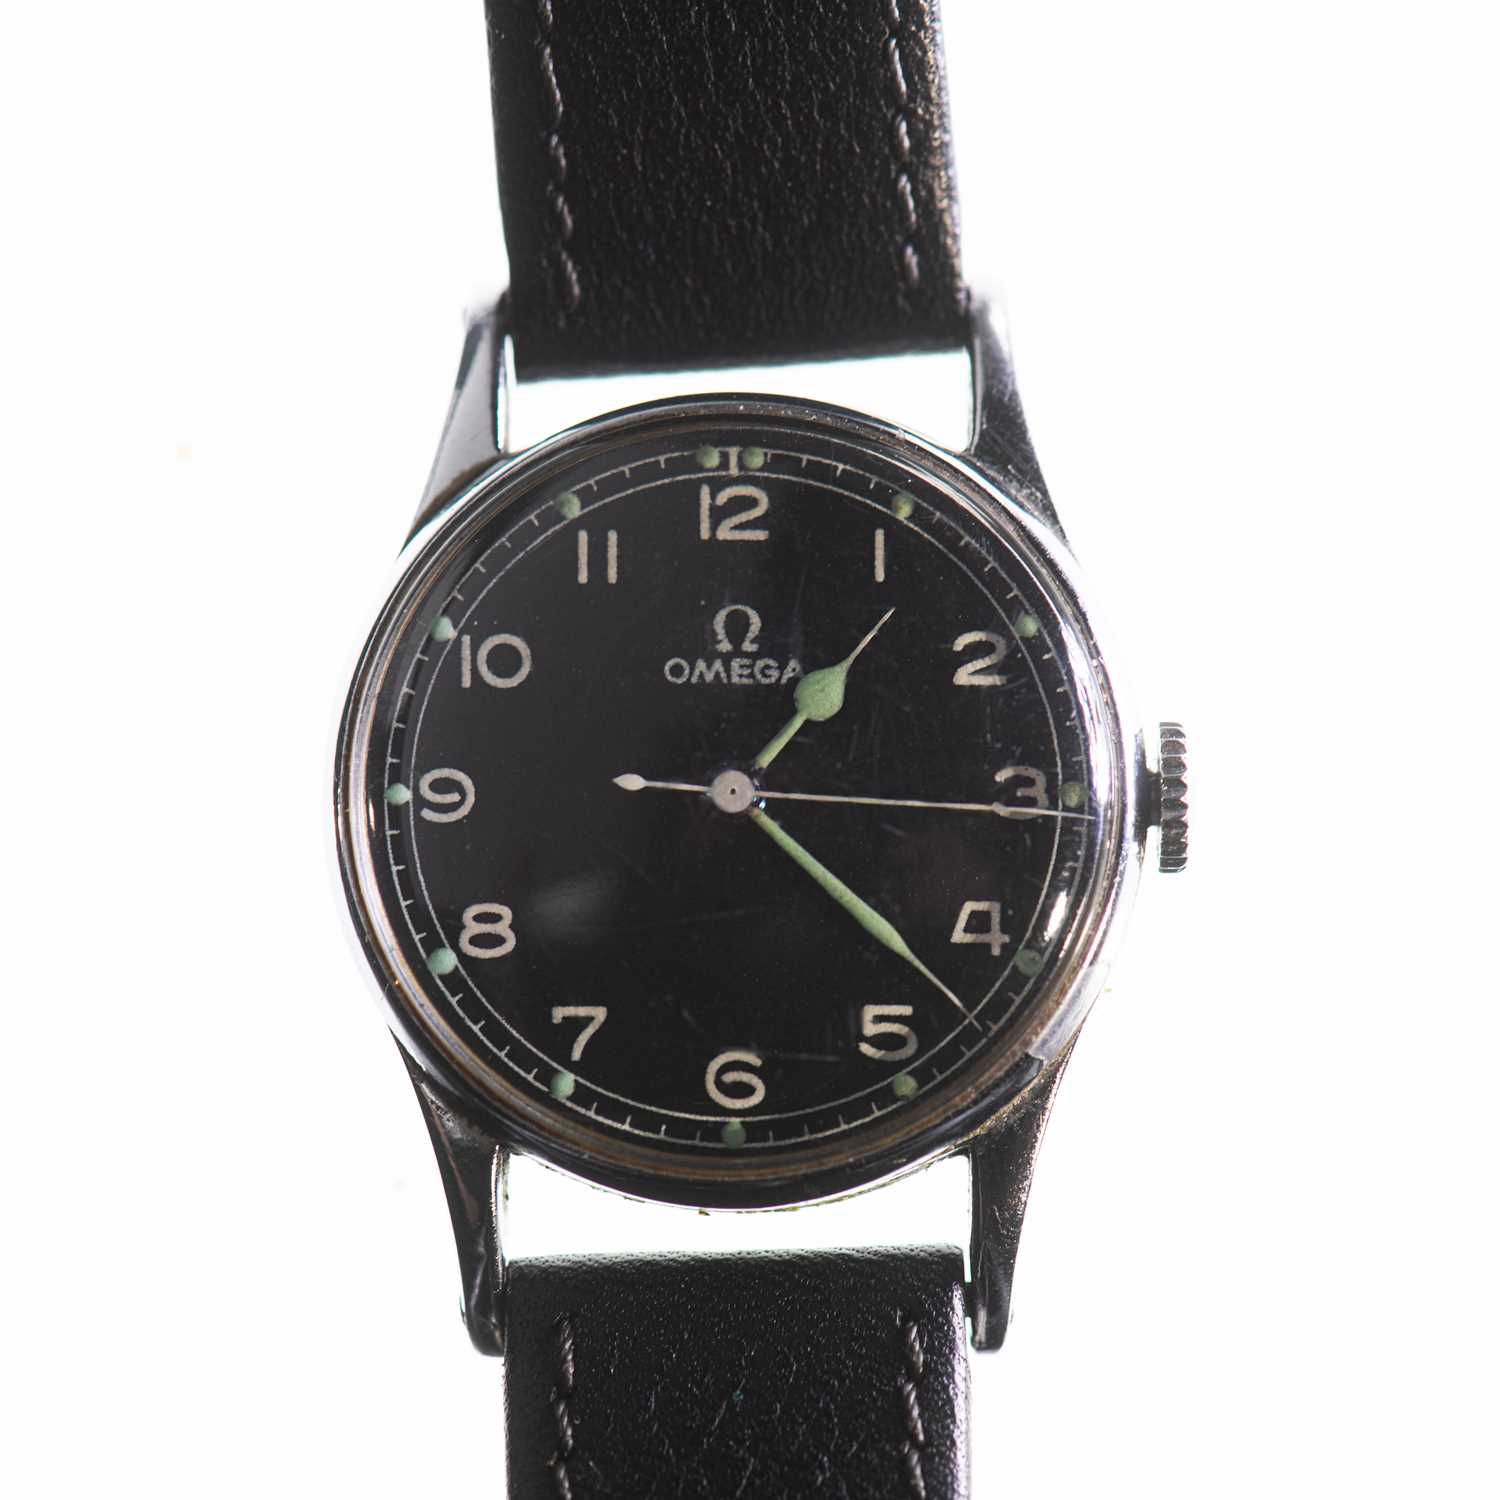 A GENTS OMEGA MILITARY STRAP WATCH